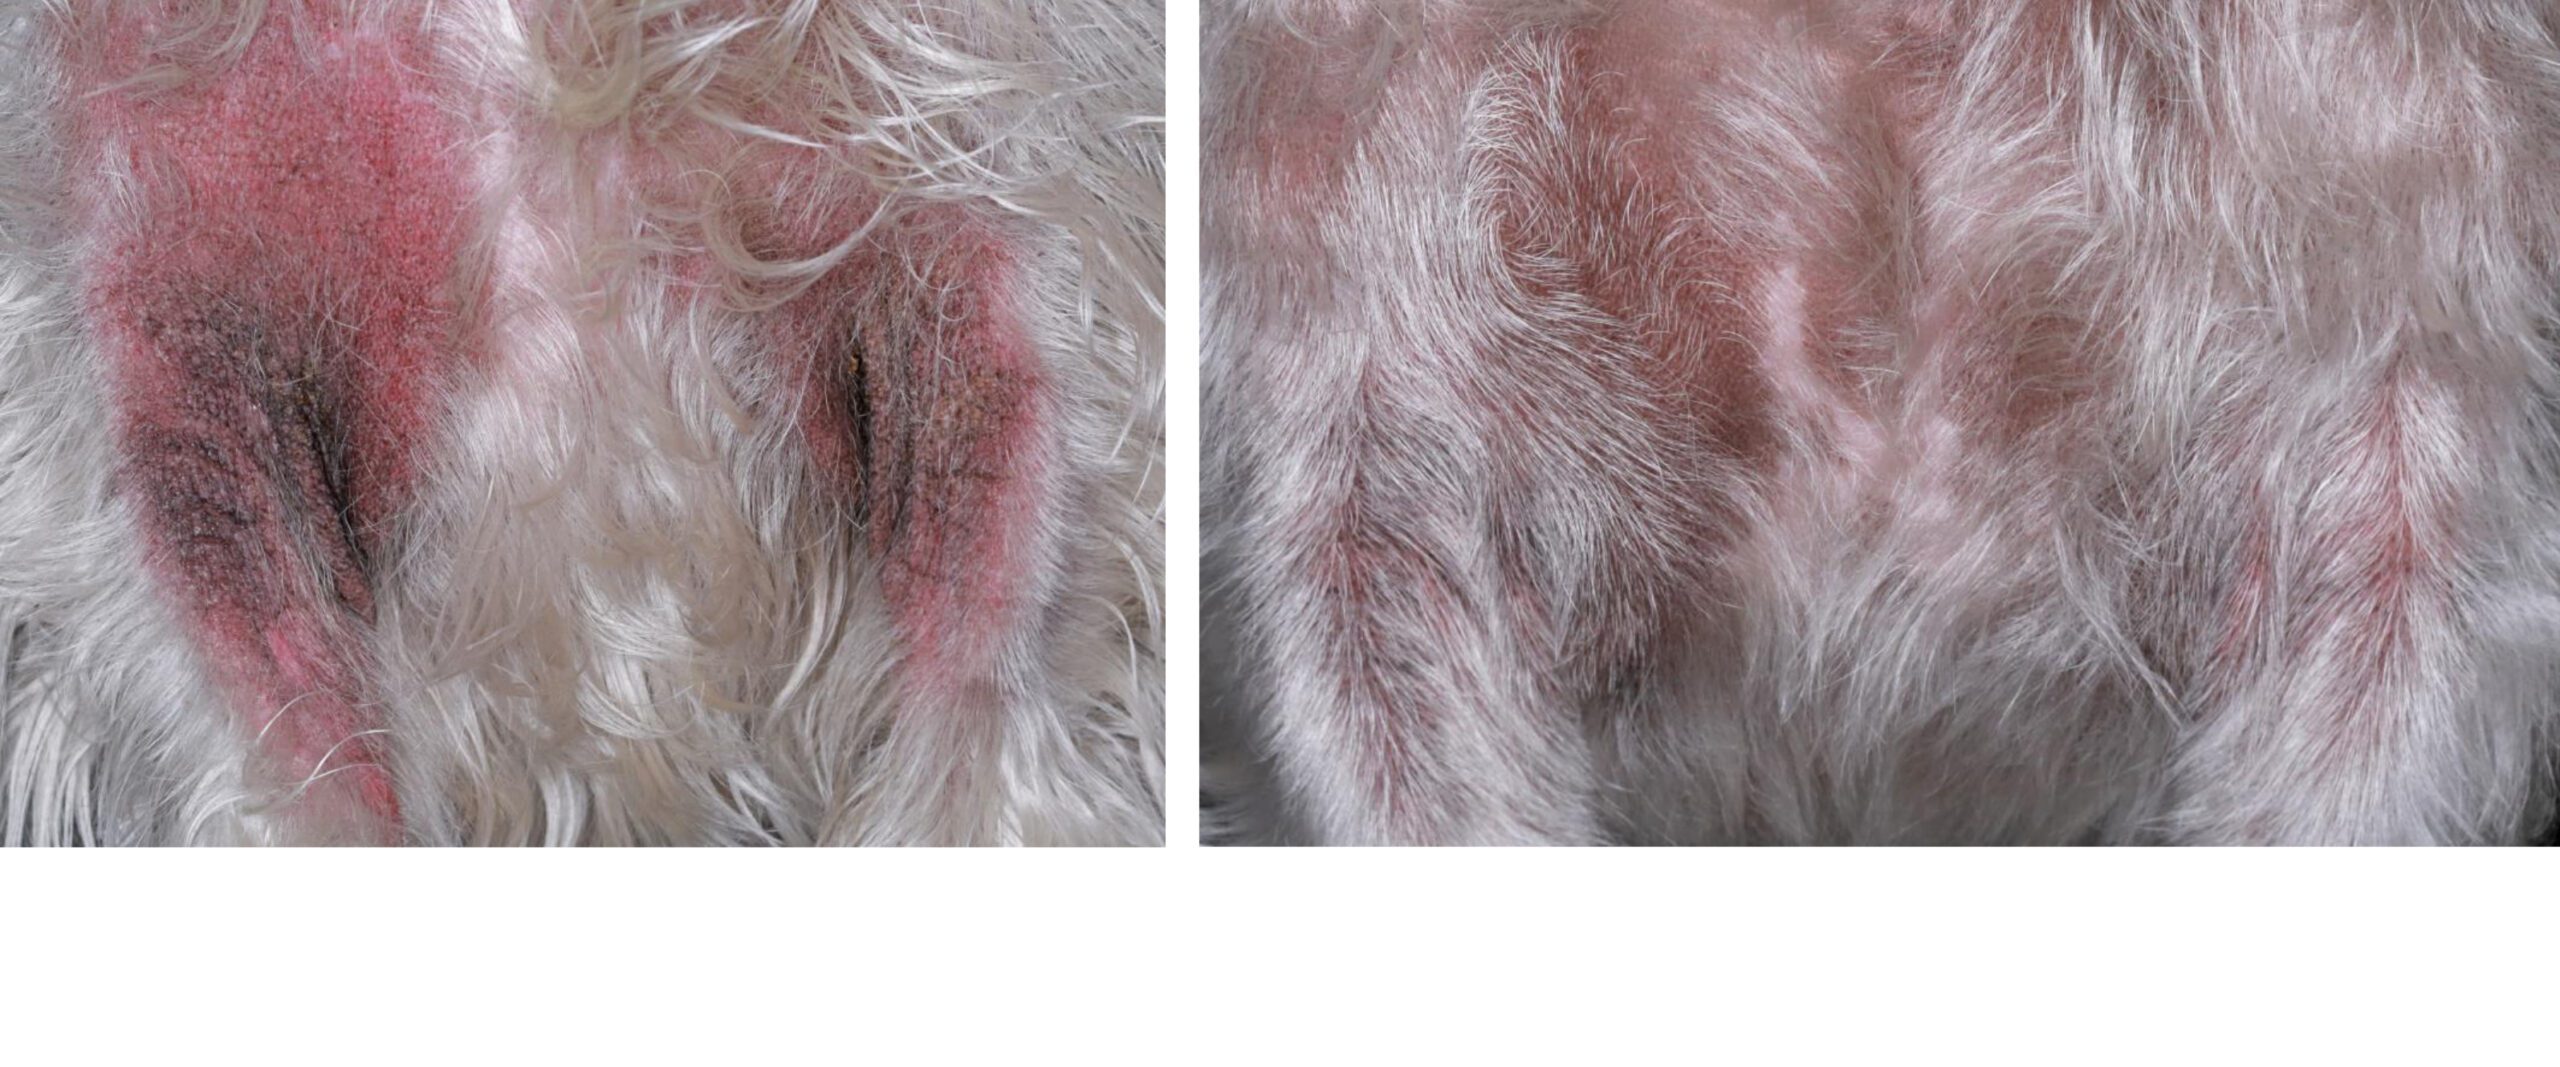 Canine Atopic Dermatitis: before & after 6wk of Multimodal Treatment, West Highland White Terrier